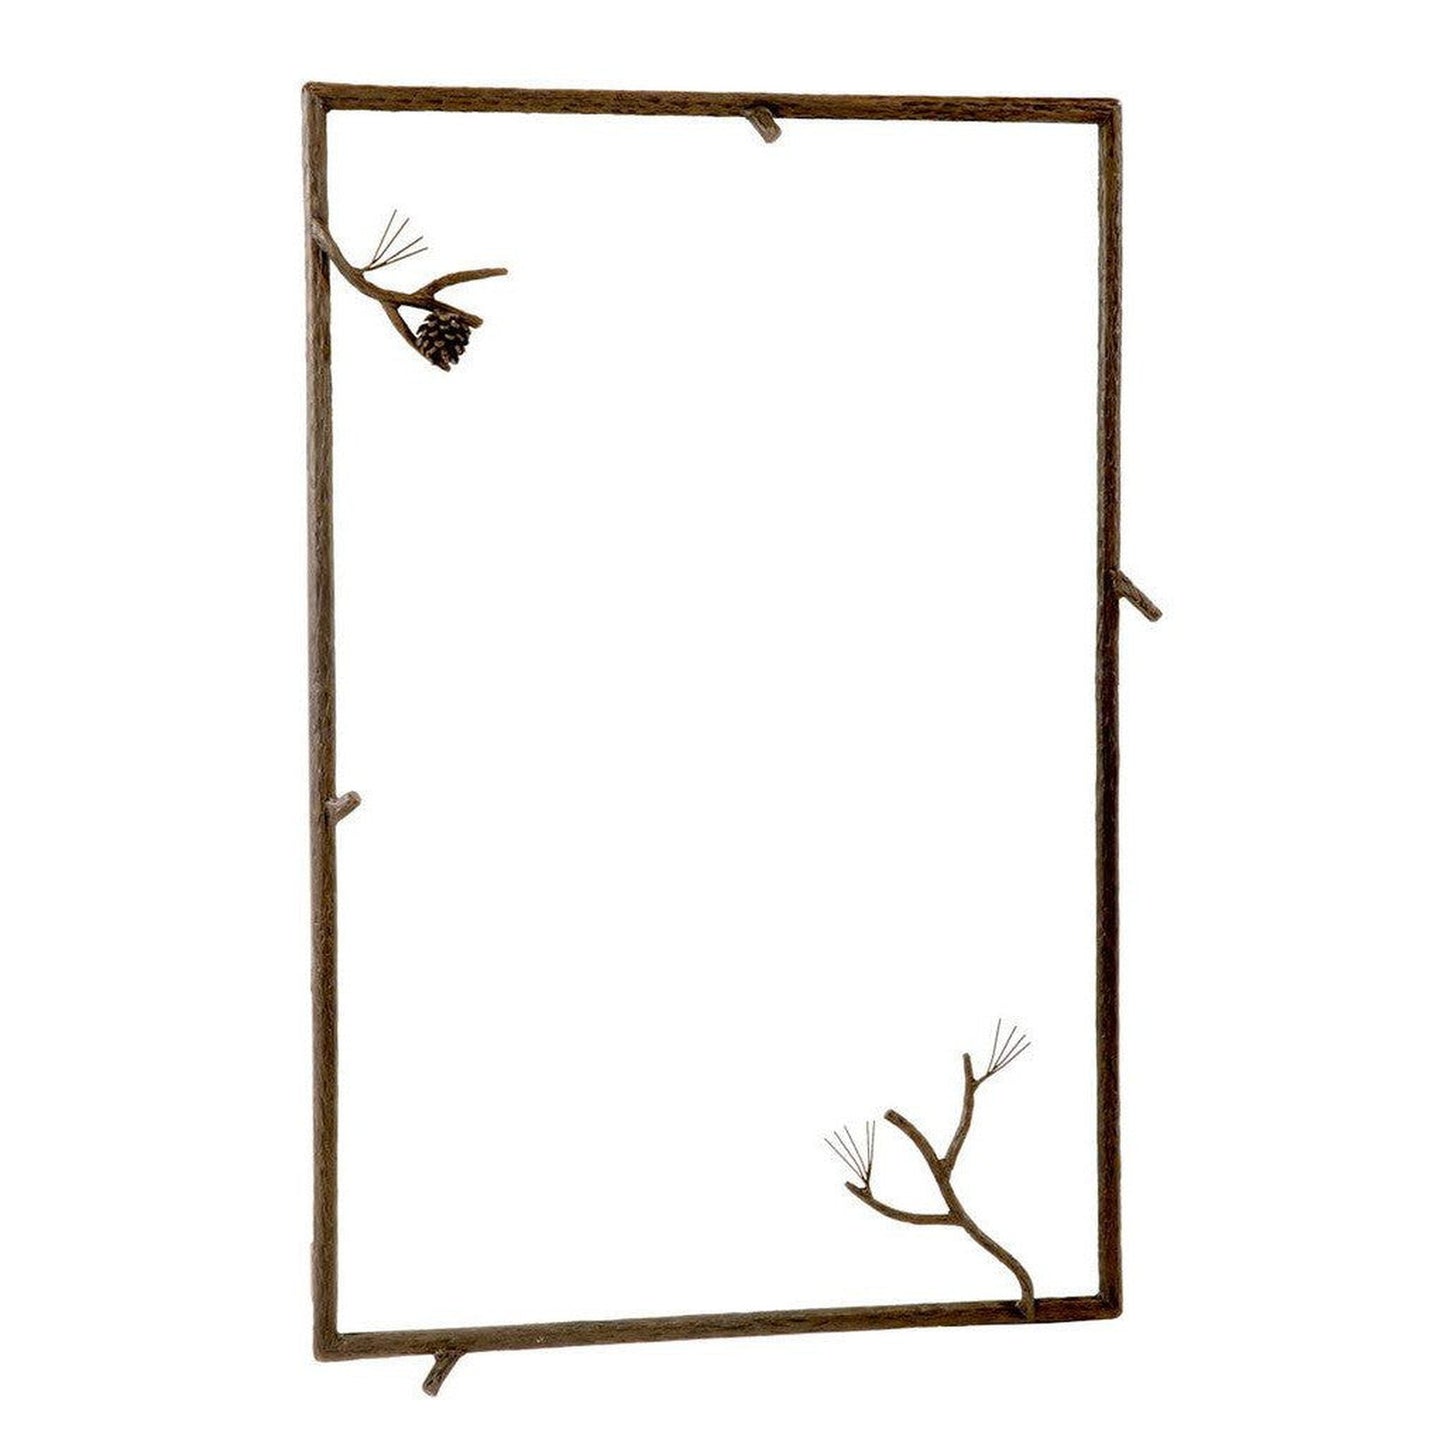 Stone County Ironworks Pine 37" x 25" Large Woodland Brown Iron Wall Mirror